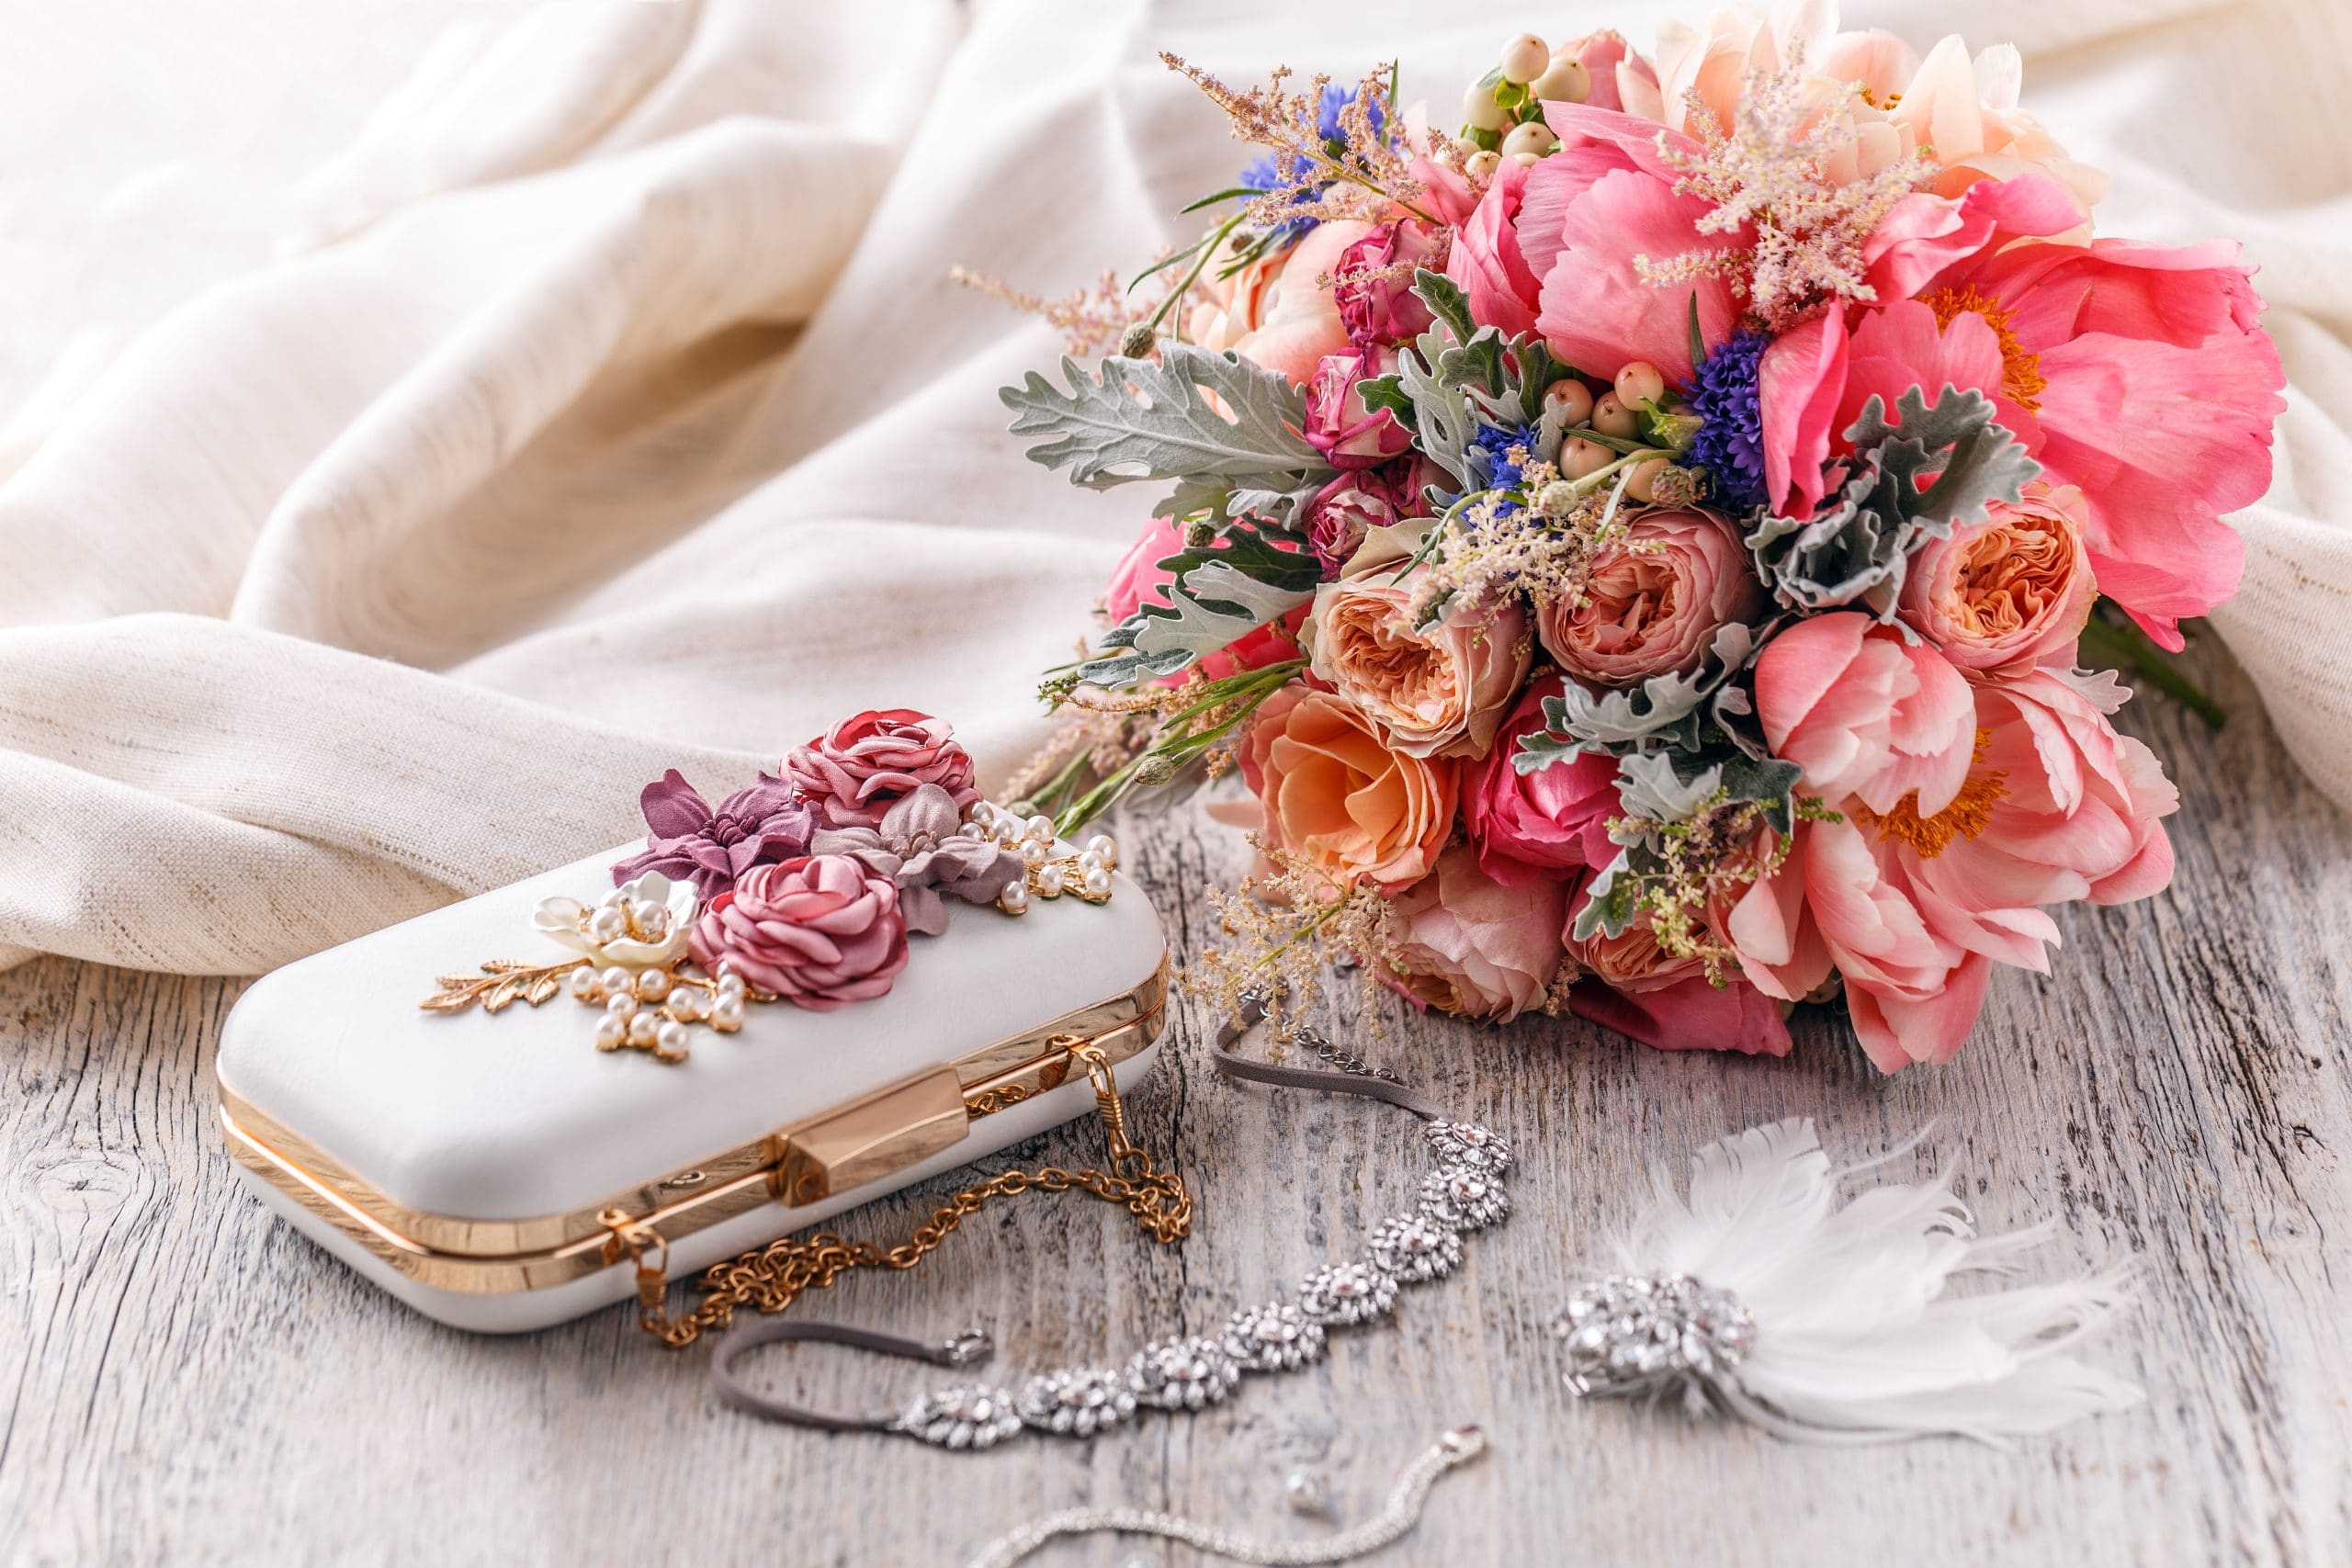 Wedding details. Bouquet and bridal accessories